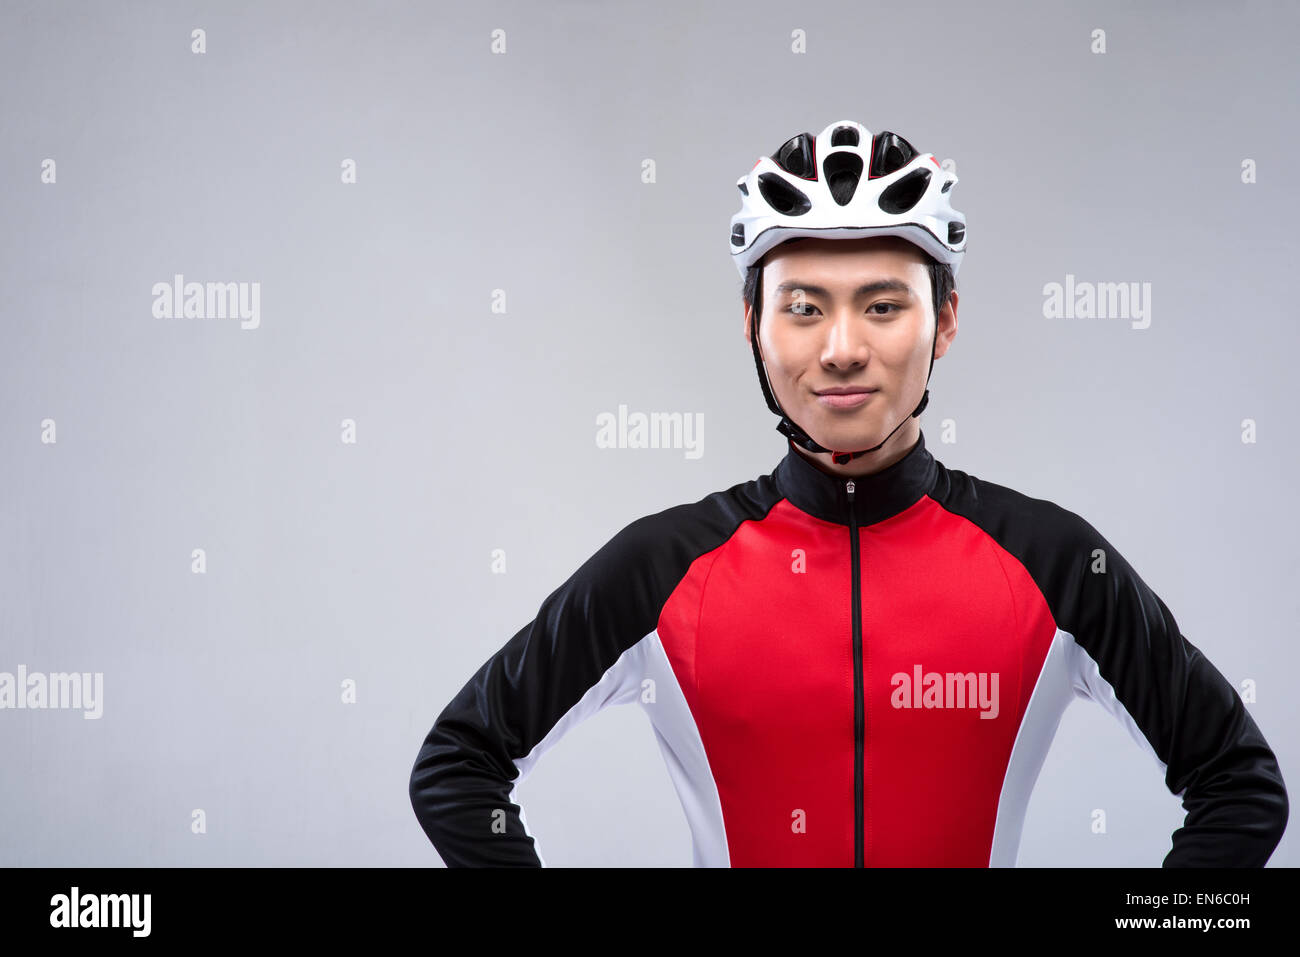 Young man standing with hands on hips before mountain biking Stock Photo